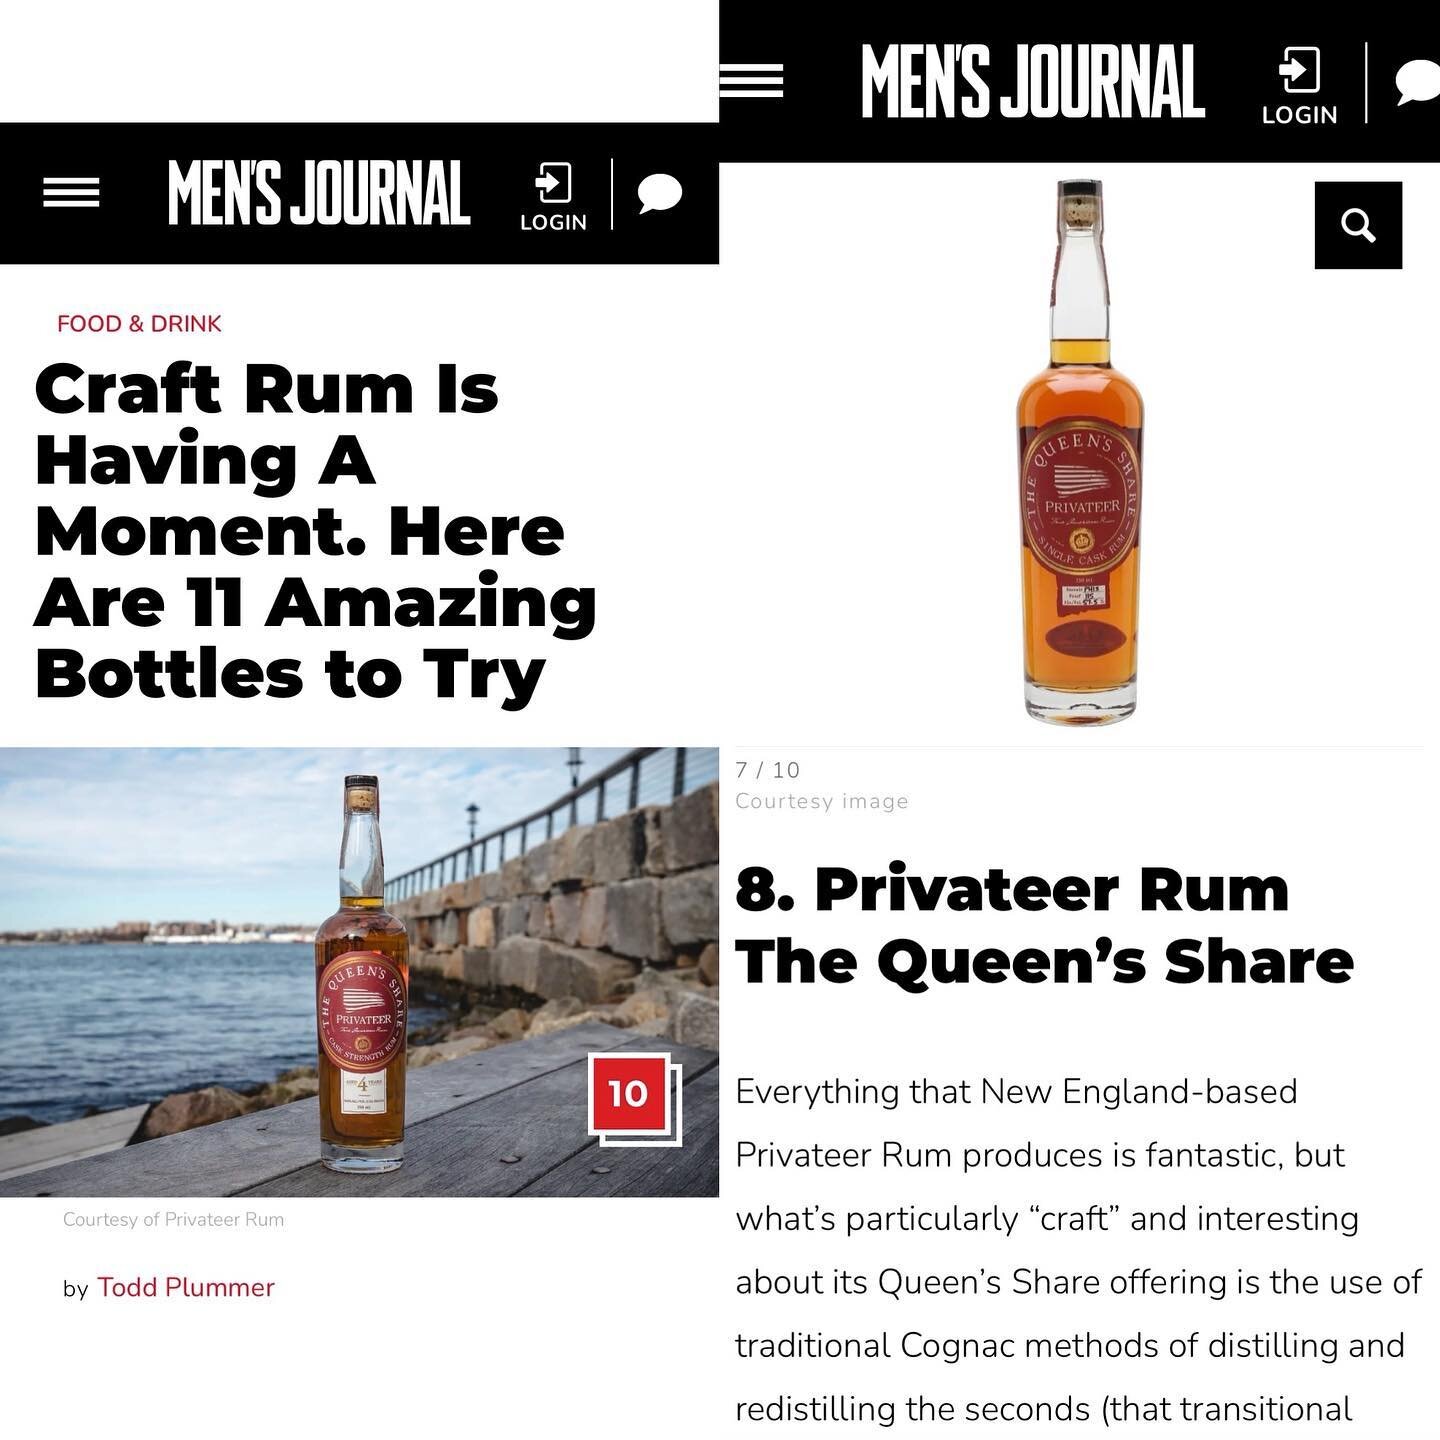 We&rsquo;re here for this moment! Thanks @mensjournal + @eatgaylove for including @privateerrum in this craft rum roundup. Officially ready for #NationalRumDay now🍹